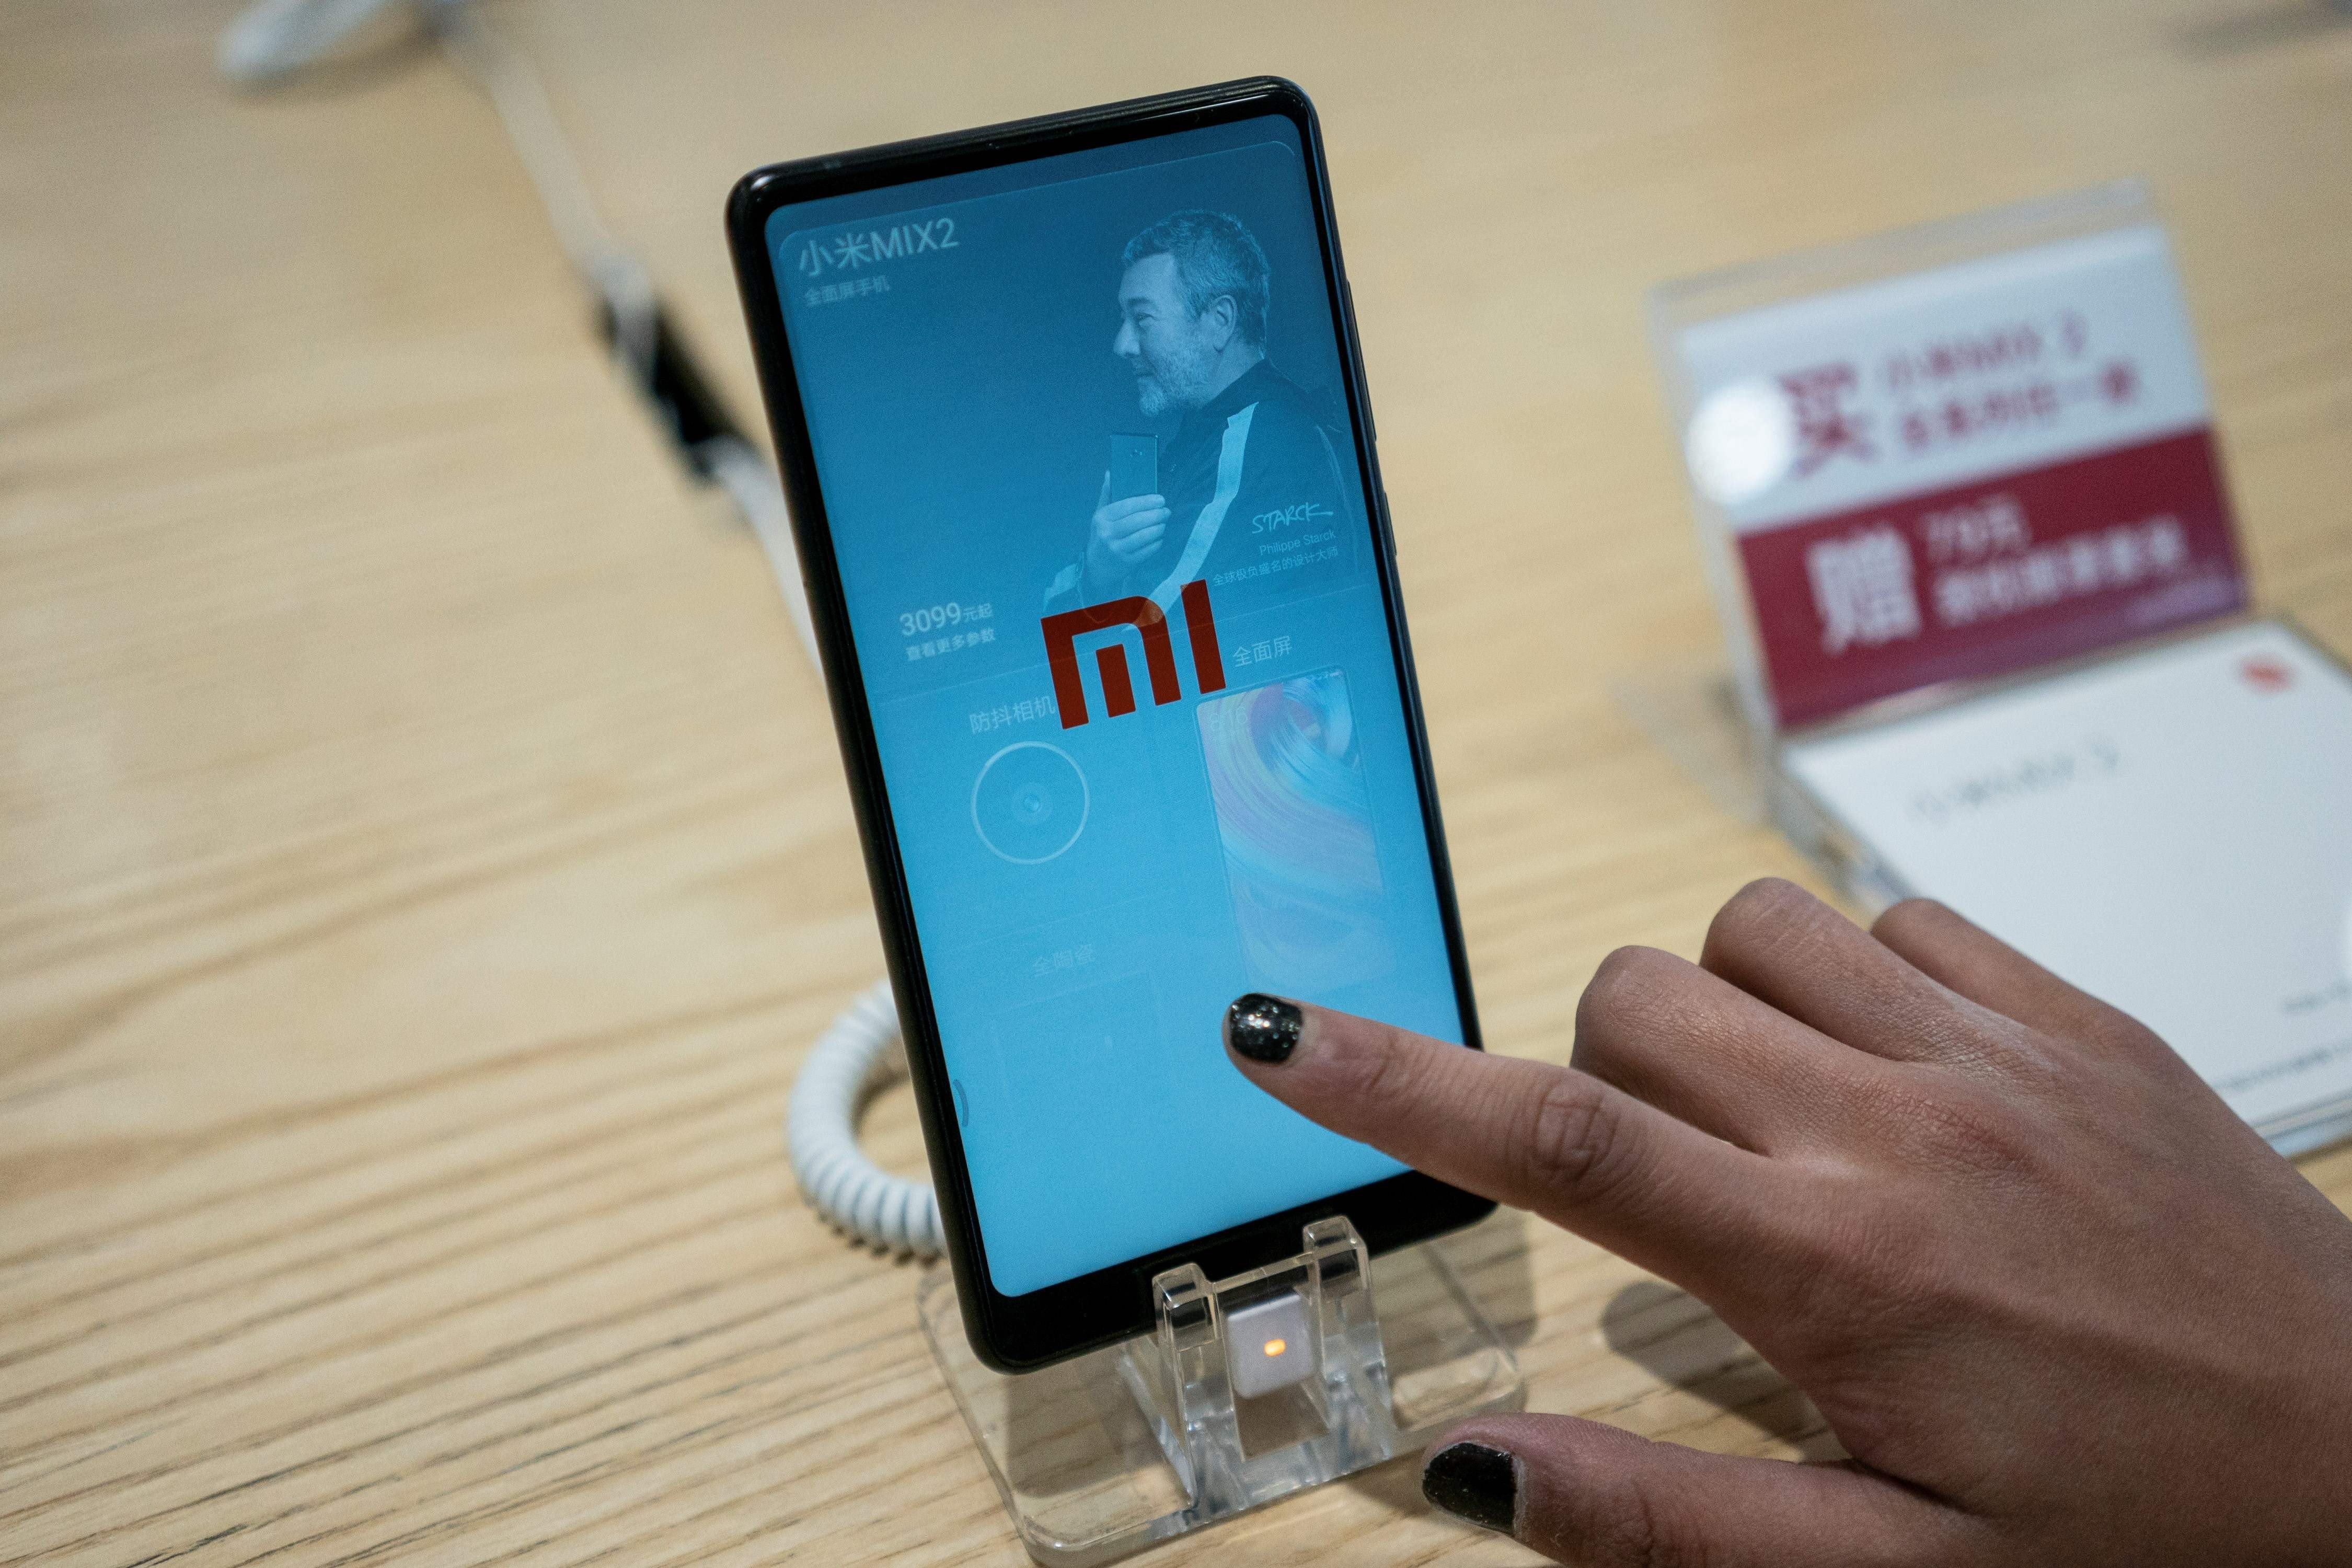 The timing of the patent infringement case has come at a sensitive period for Xiaomi, which is now preparing for its public listing in Hong Kong 